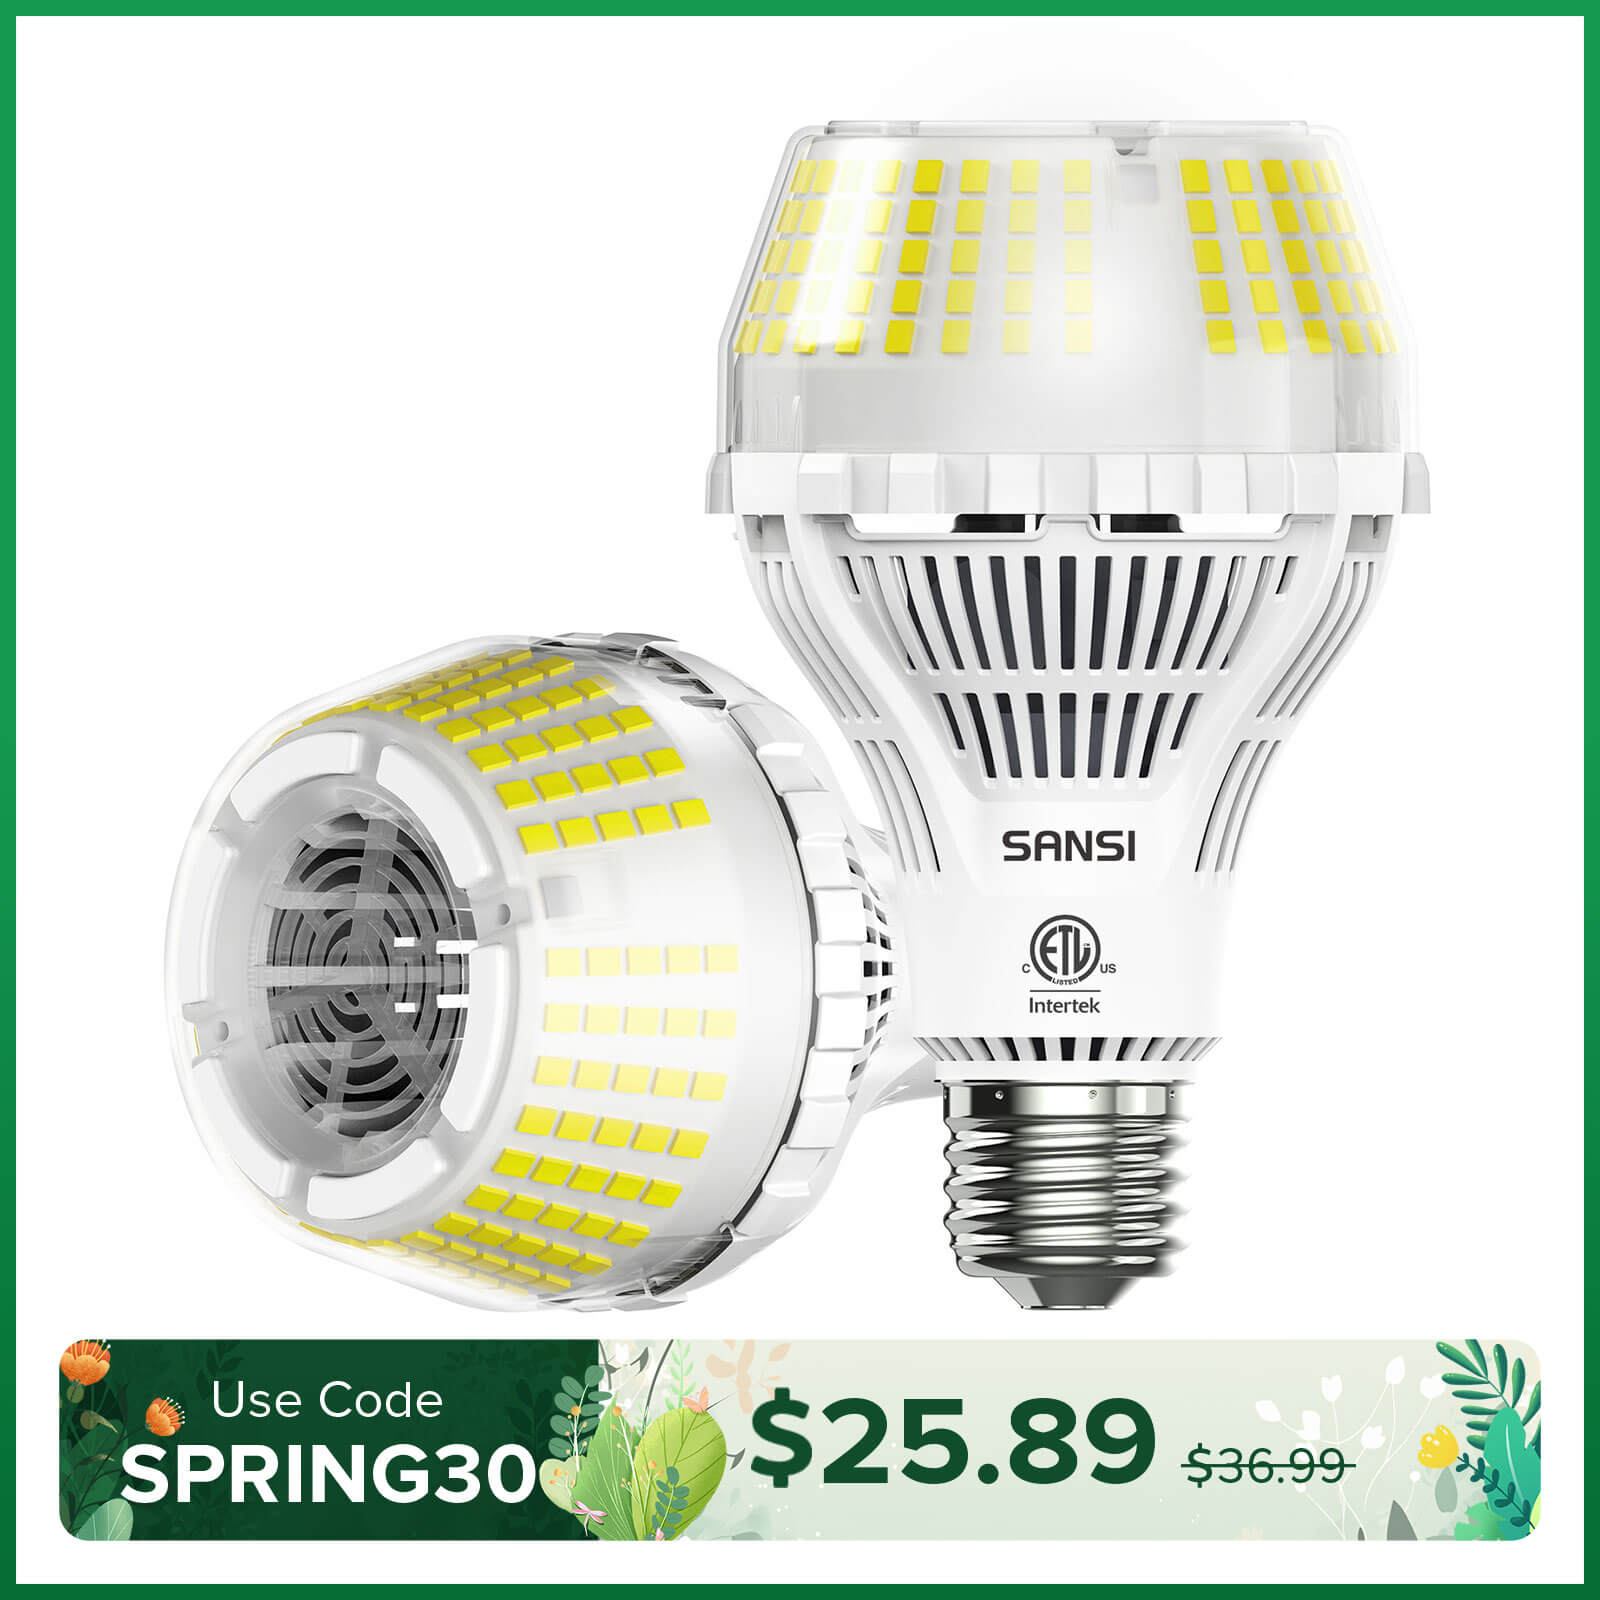 Upgraded Non-Dimmable A21 27W LED 5000K Light Bulb(US ONLY)